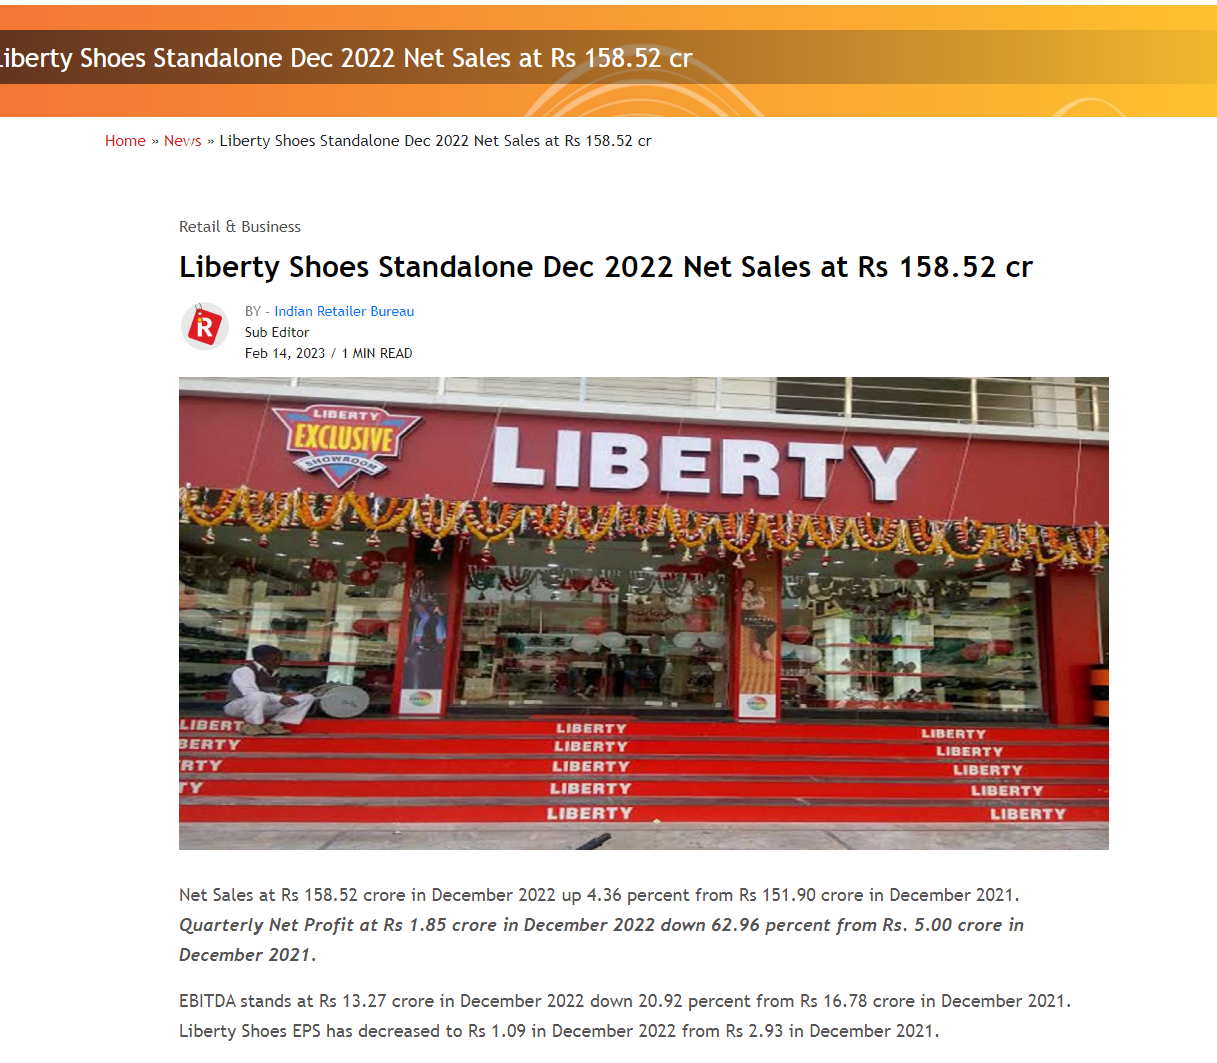 Liberty Shoes Standalone Dec 2022 Net Sales at Rs 158.52 cr